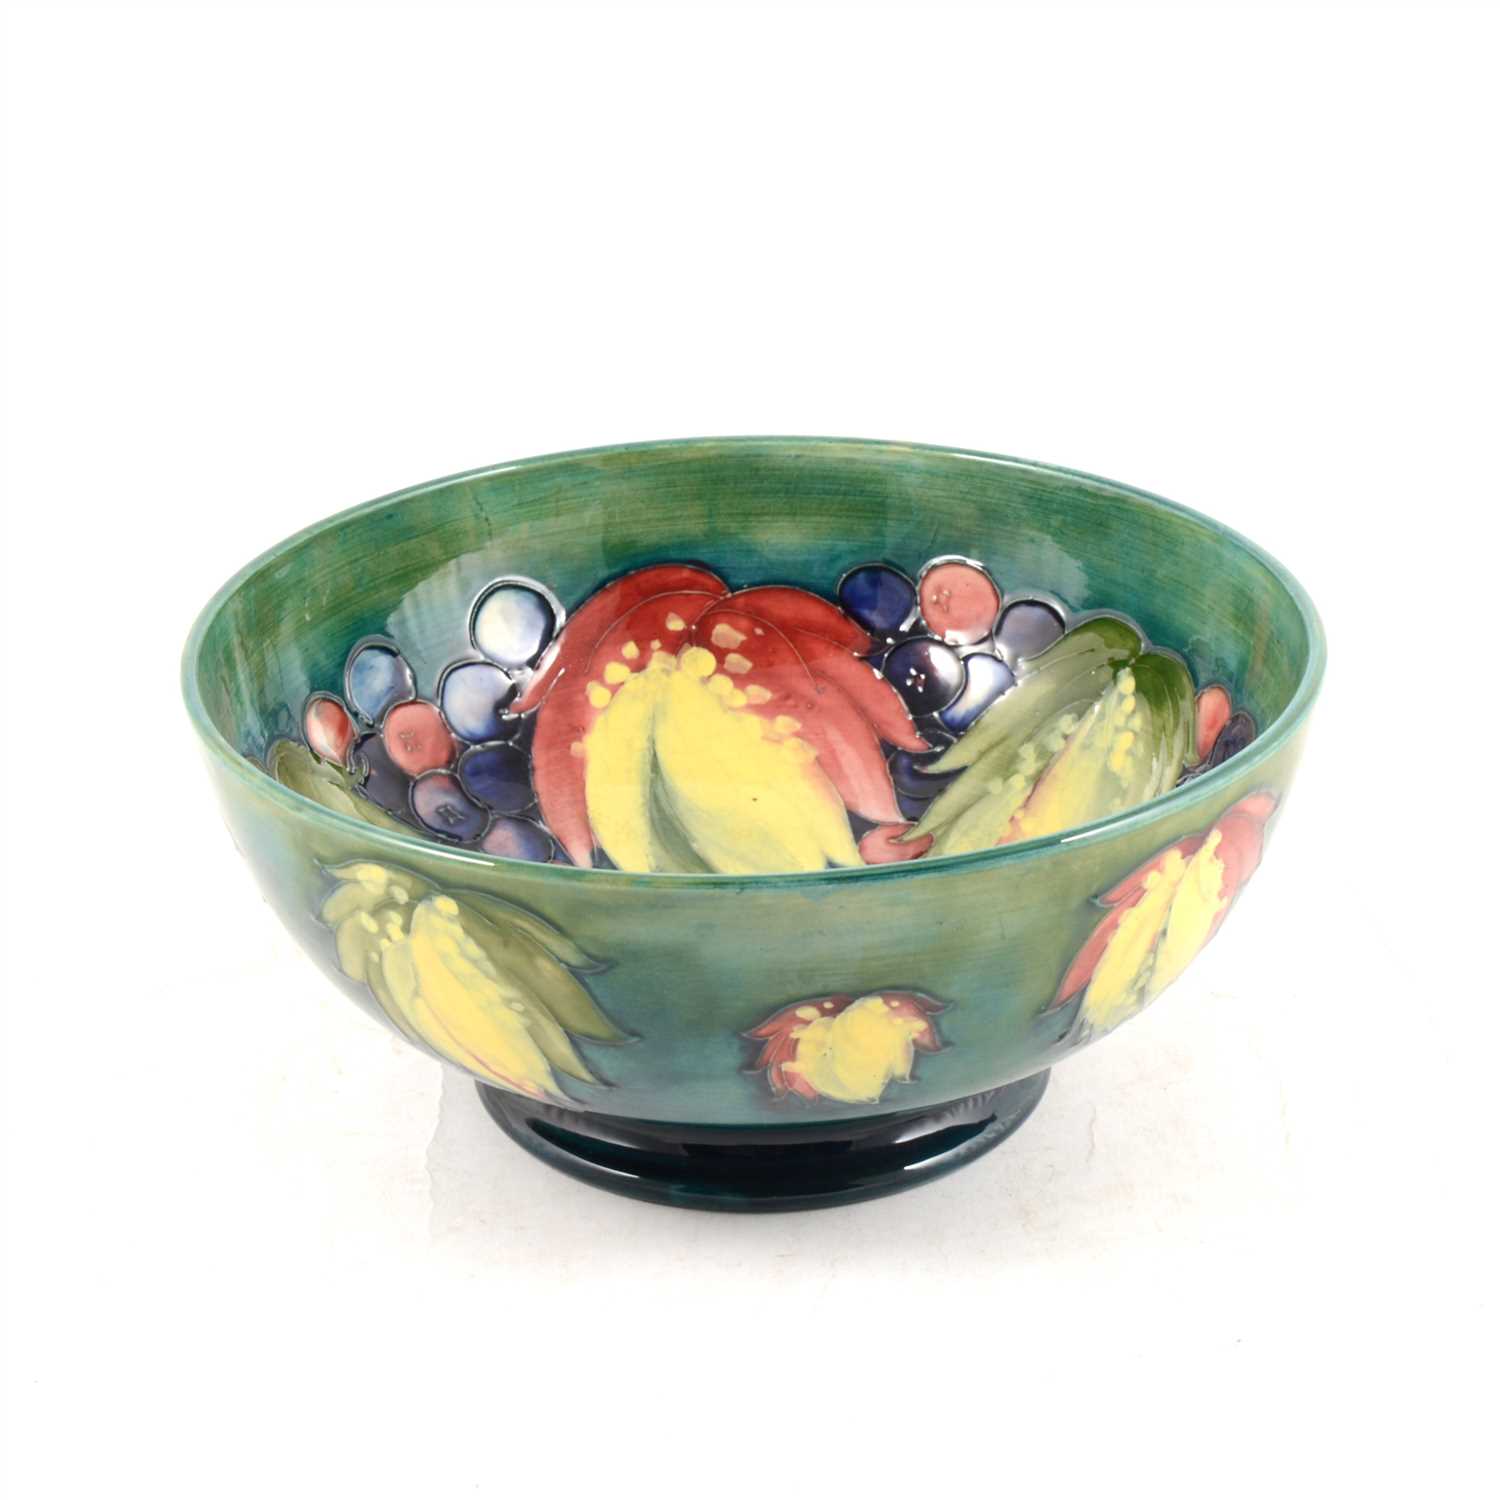 Lot 35 - Moorcroft Pottery bowl, Leaf and Berry design